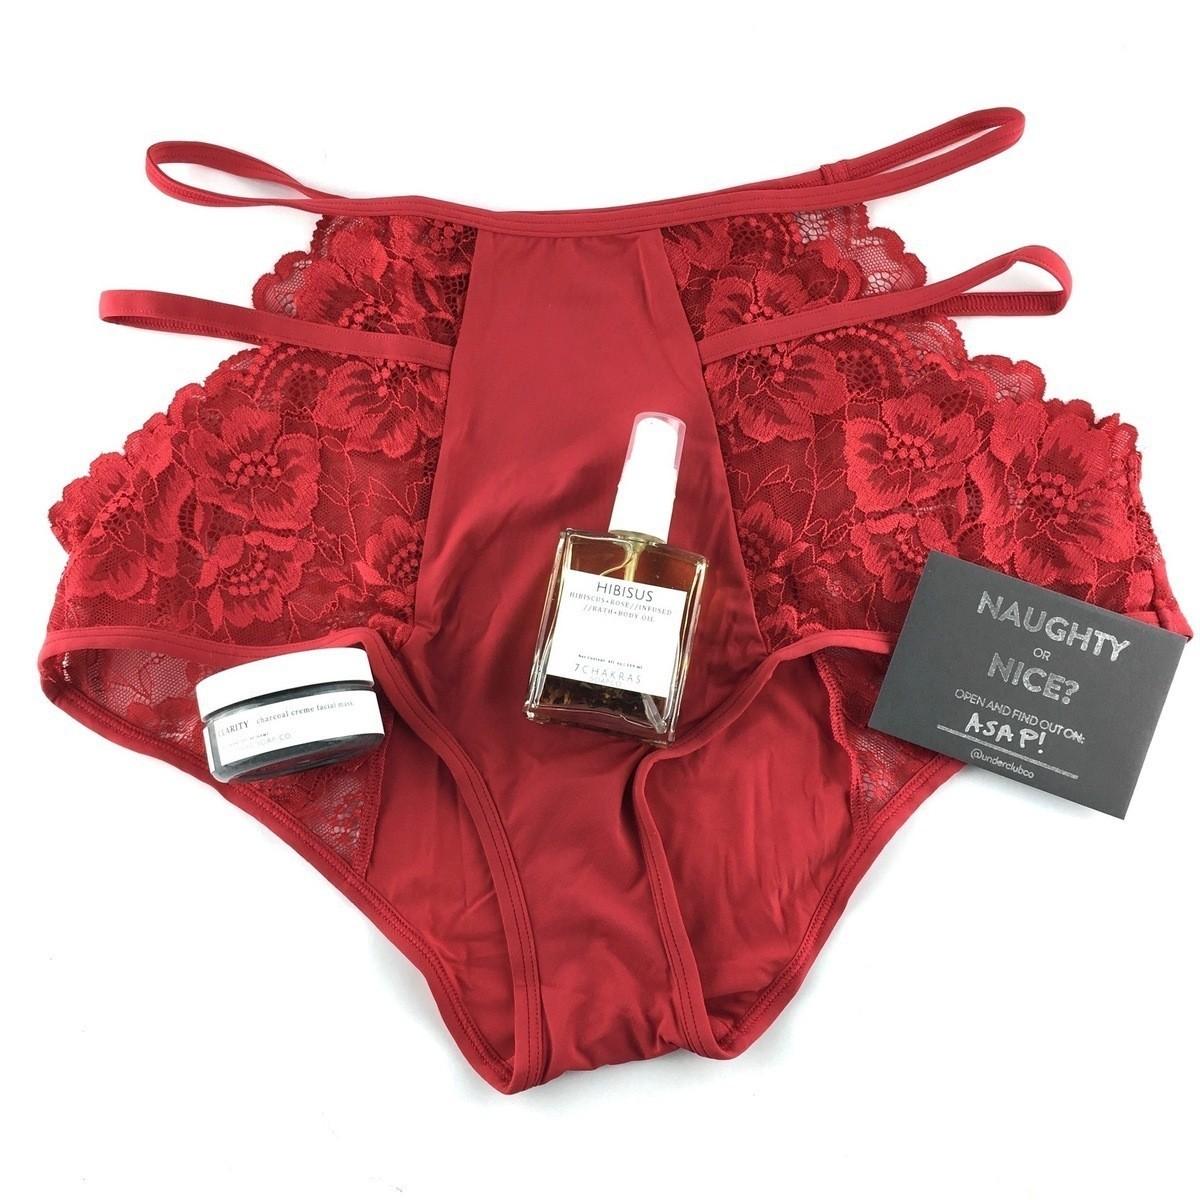 Underclub “You’ve Been Naughty” Holiday Set Review